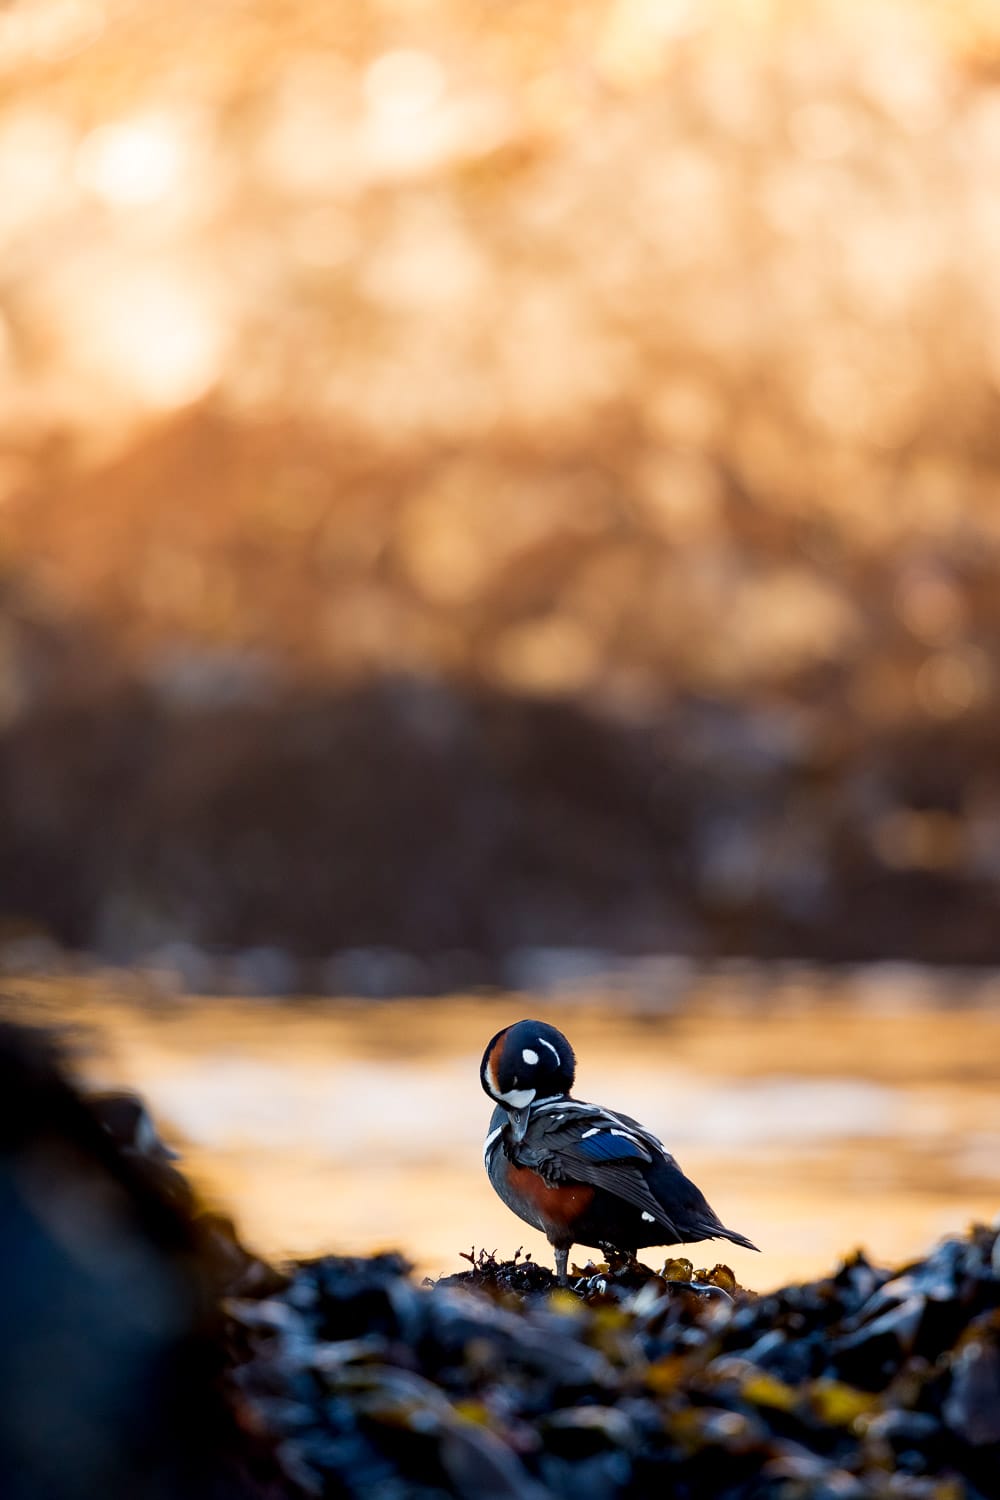 A harlequin duck standing on a rocky shoreline with golden sunlight filtering through the background.